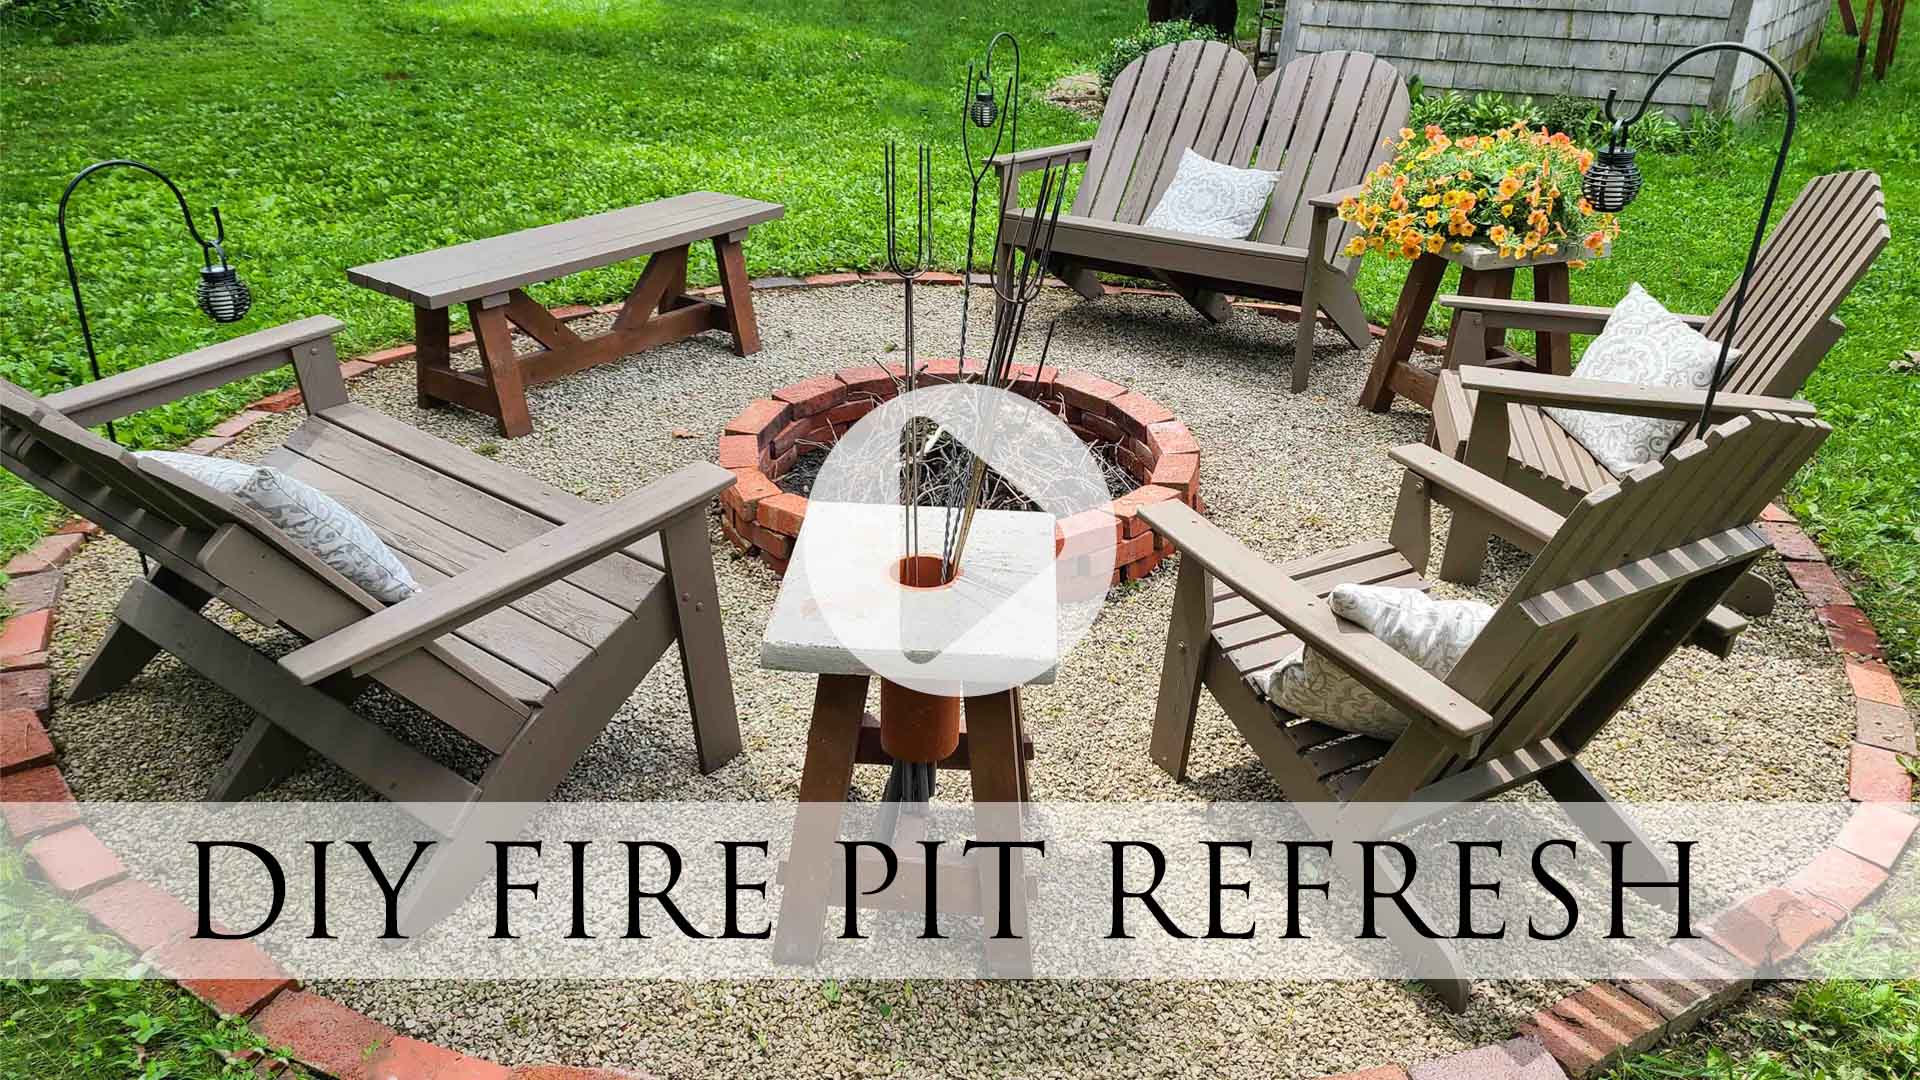 Video Feature of DIY Fire Pit by Larissa of Prodigal Pieces | prodigalpieces.com #prodigalpieces